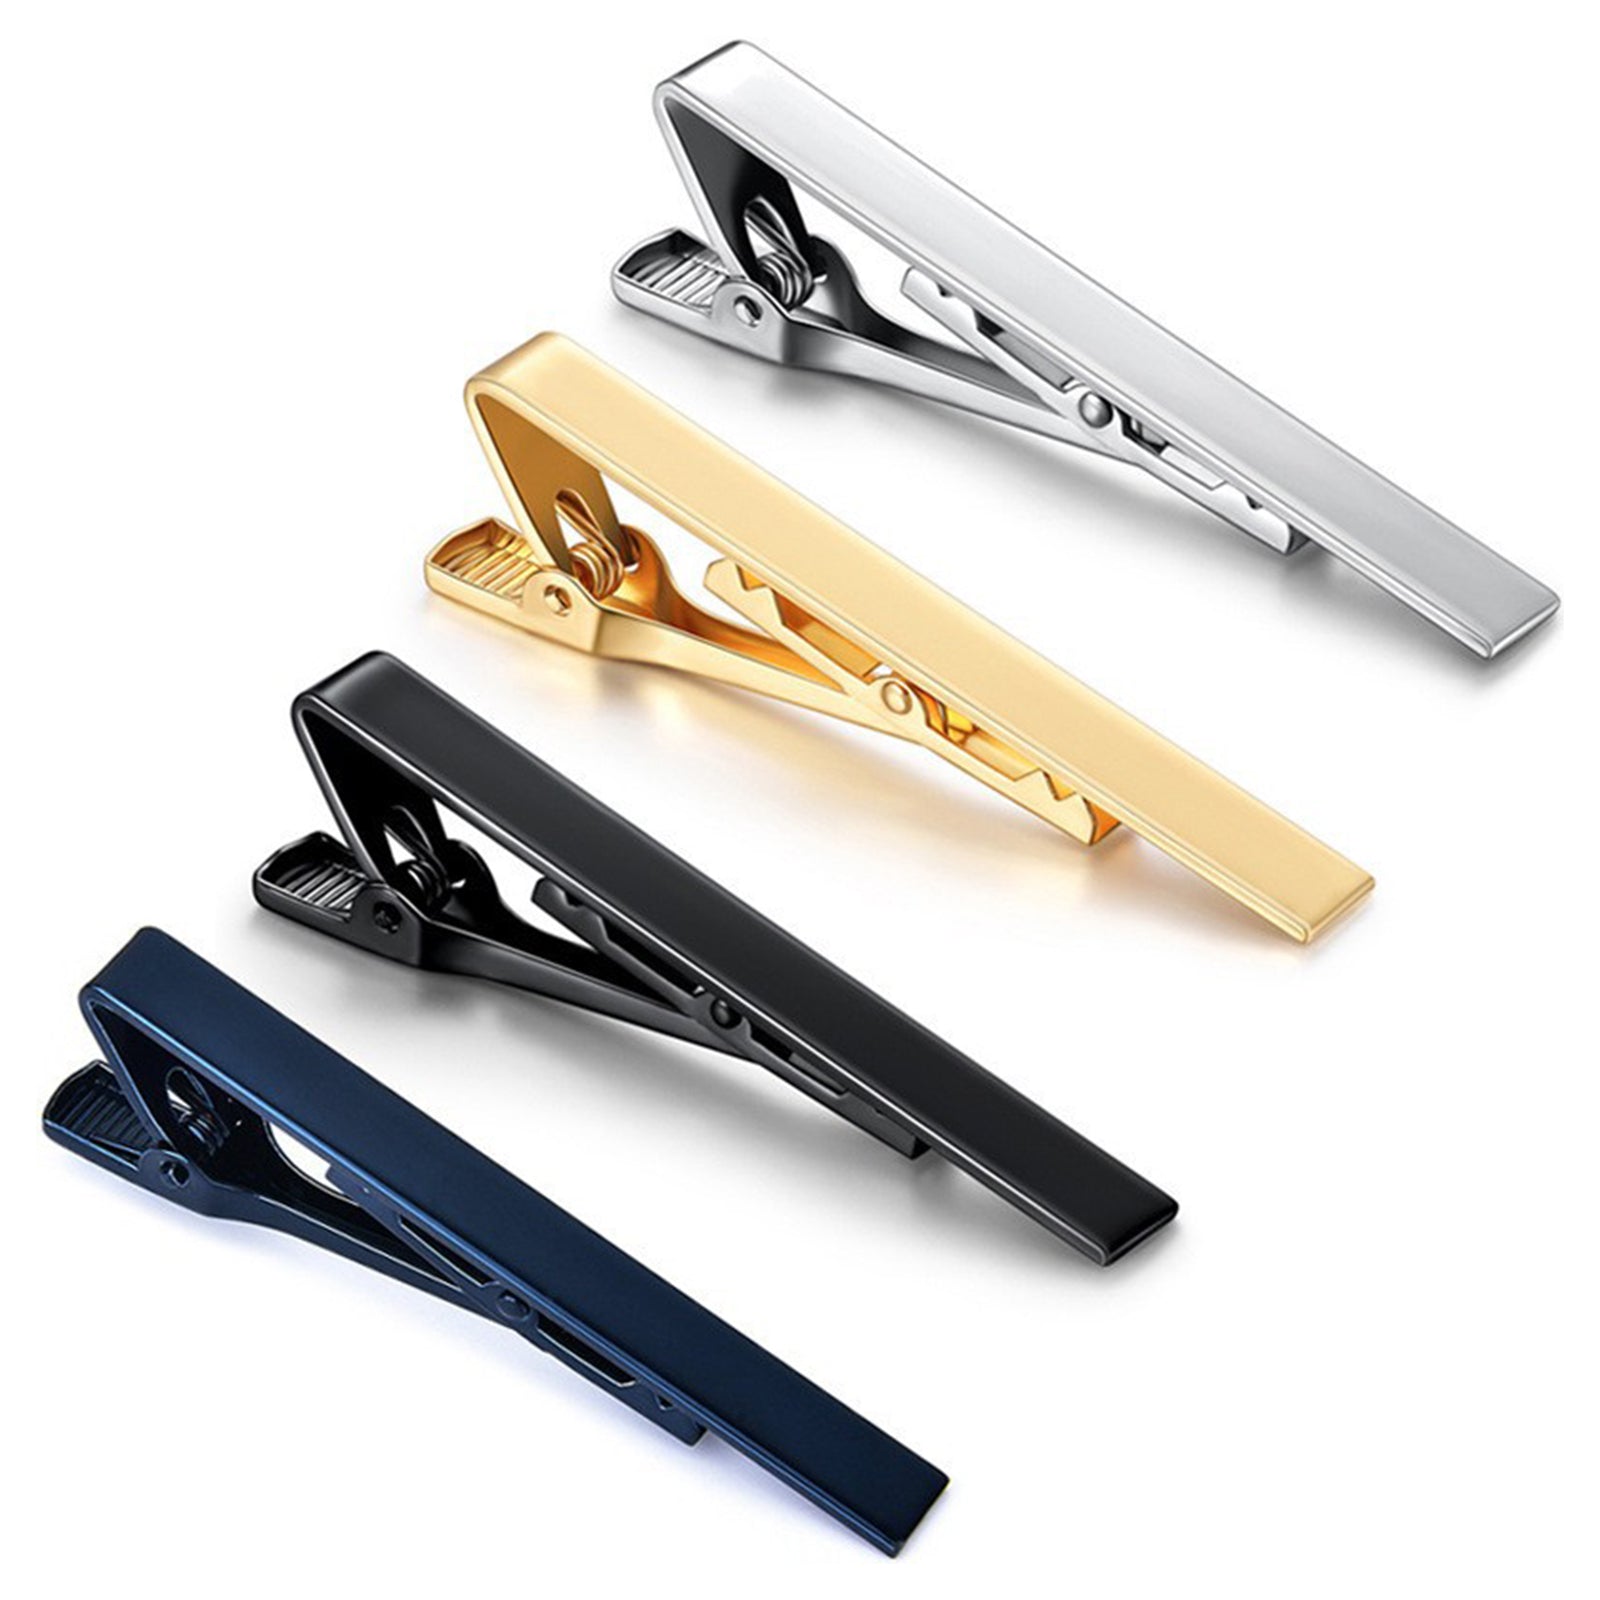 Personalized Tie Clip Stainless Steel Custom Engraved Tie Clips for Men Gift with Gift Box - CREATORALLY